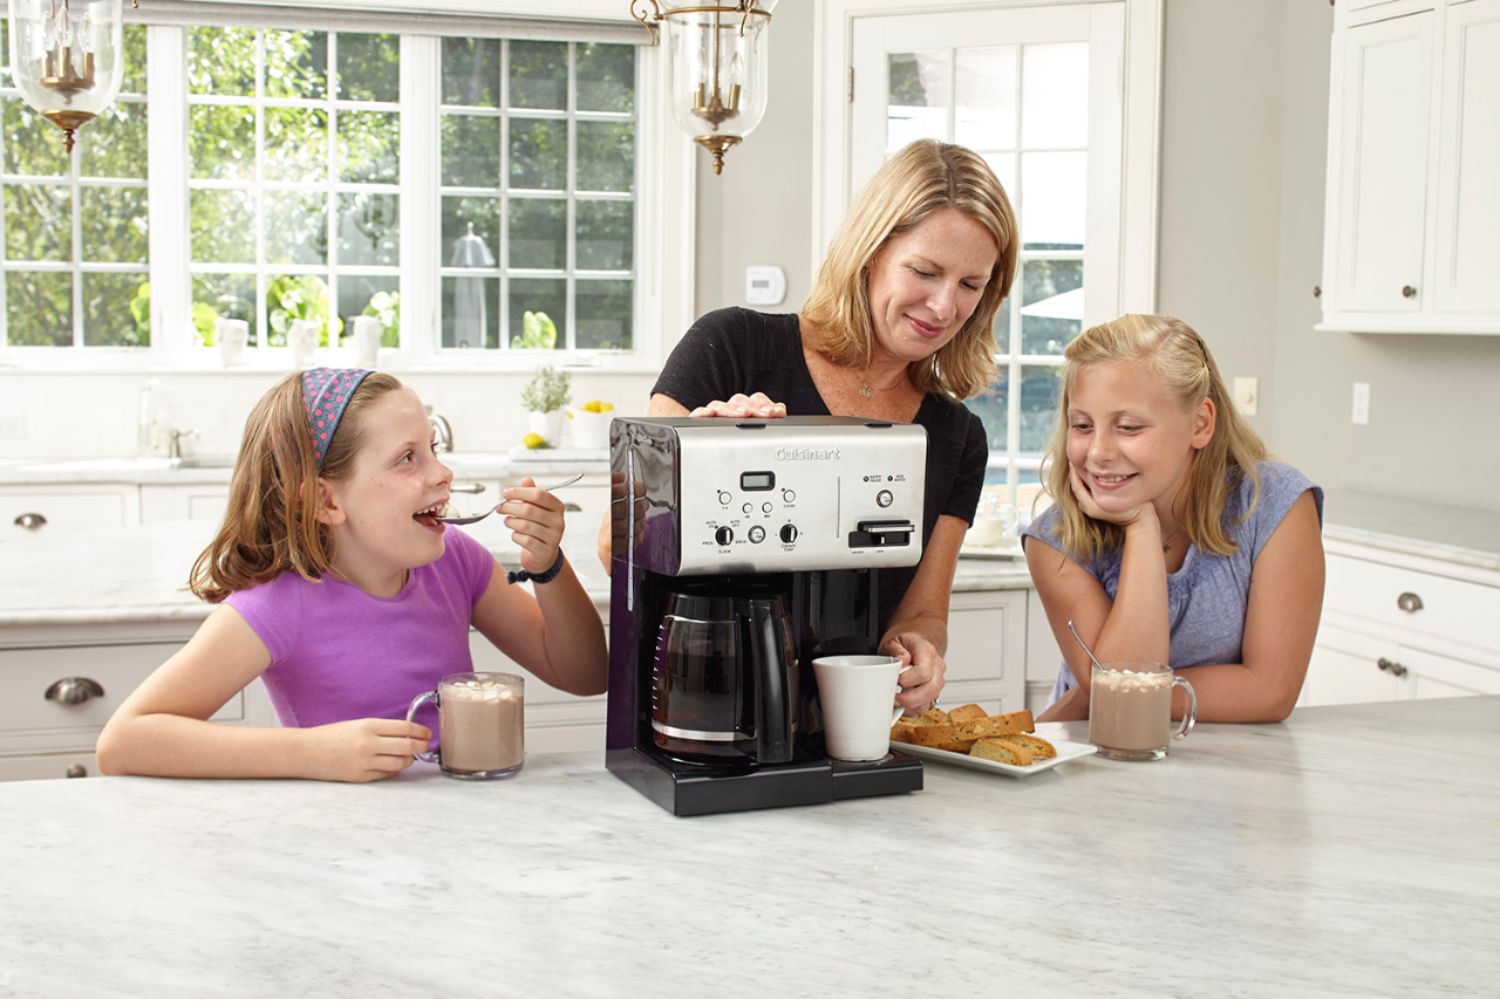 Cuisinart® 12-Cup Coffee Maker with Hot Water System CHW-12